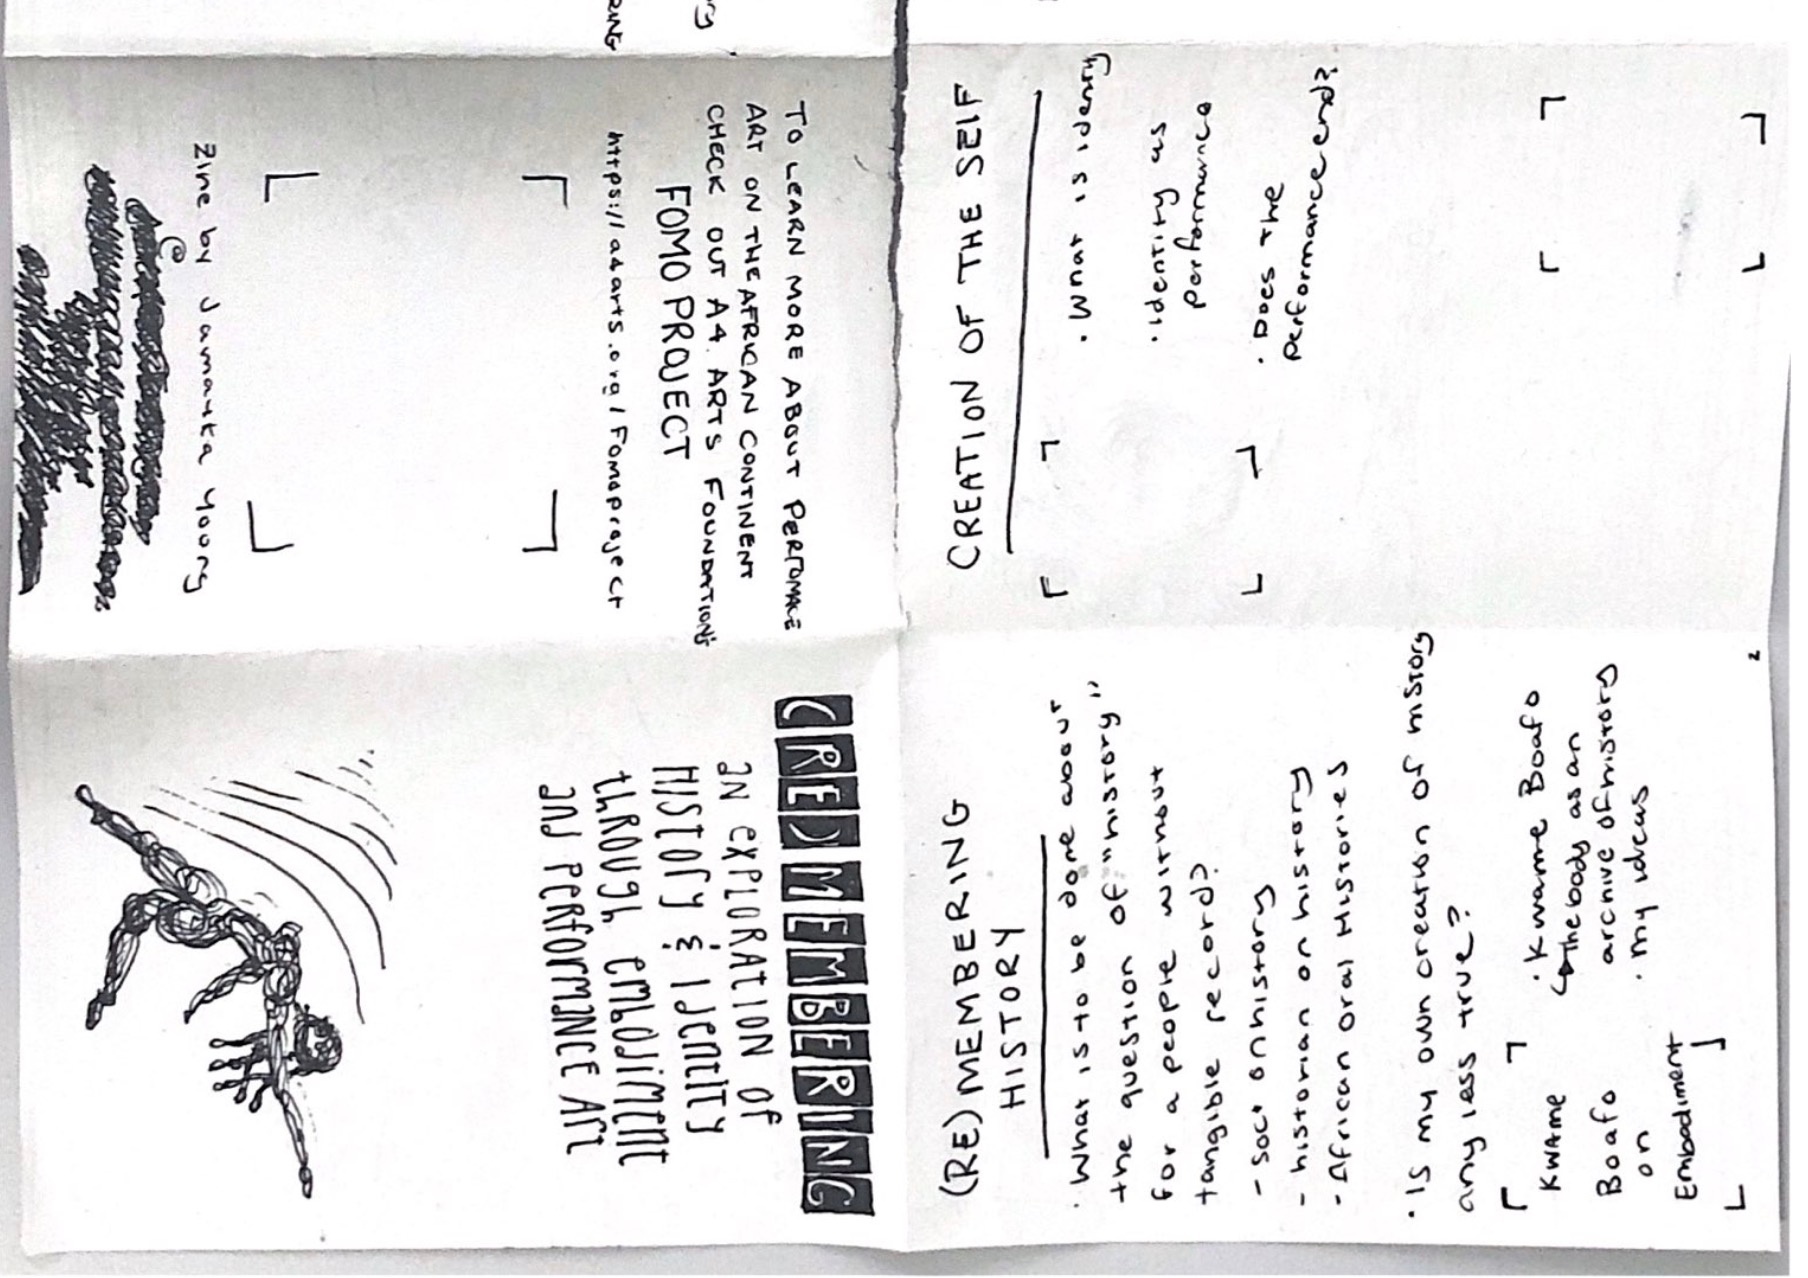 Scan of ‘(Re)membering: An exploration of history & identity through embodiment and performance art’, a zine produced by Jamayka Young as part of the Stanford Internship at A4. It depicts a fold-out view of the zine, consisting largely of black felt pen writing and a drawing of a leaping figure.
